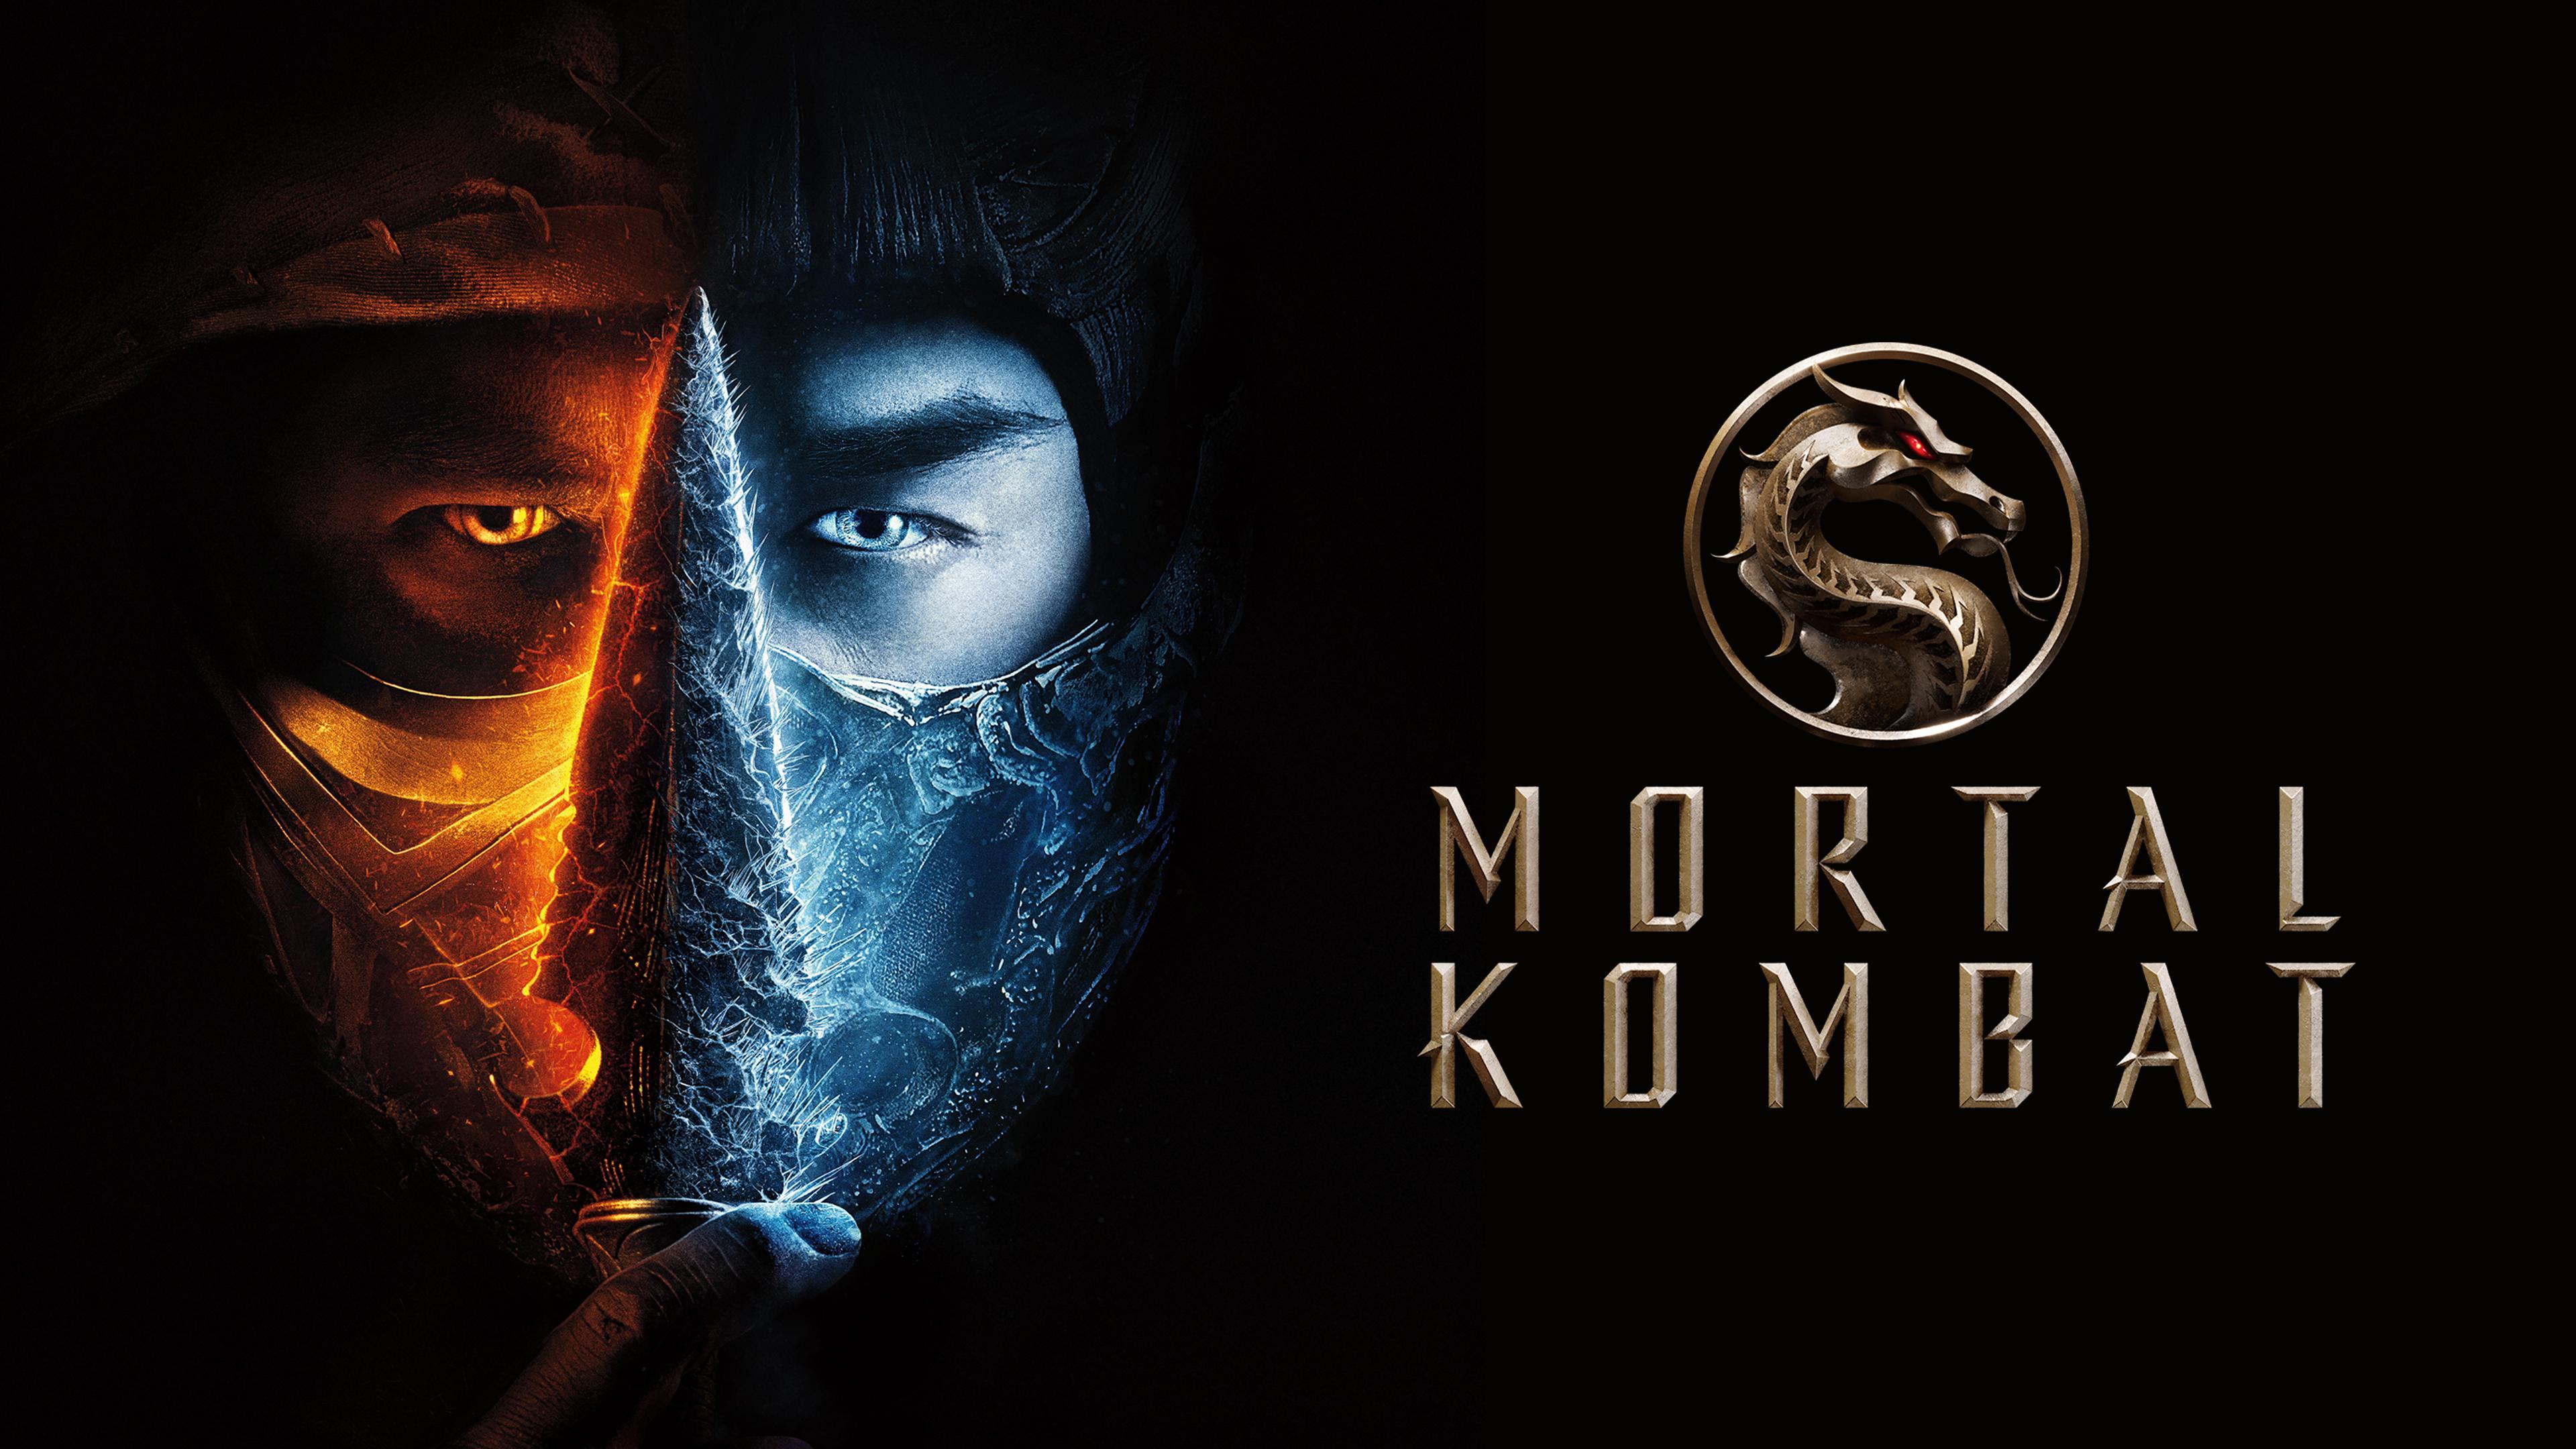 Mortal Kombat Movie on X: On April 16, Mortal Kombat enters the arena.  Coming to theaters and streaming exclusively on HBO Max. #MortalKombatMovie   / X